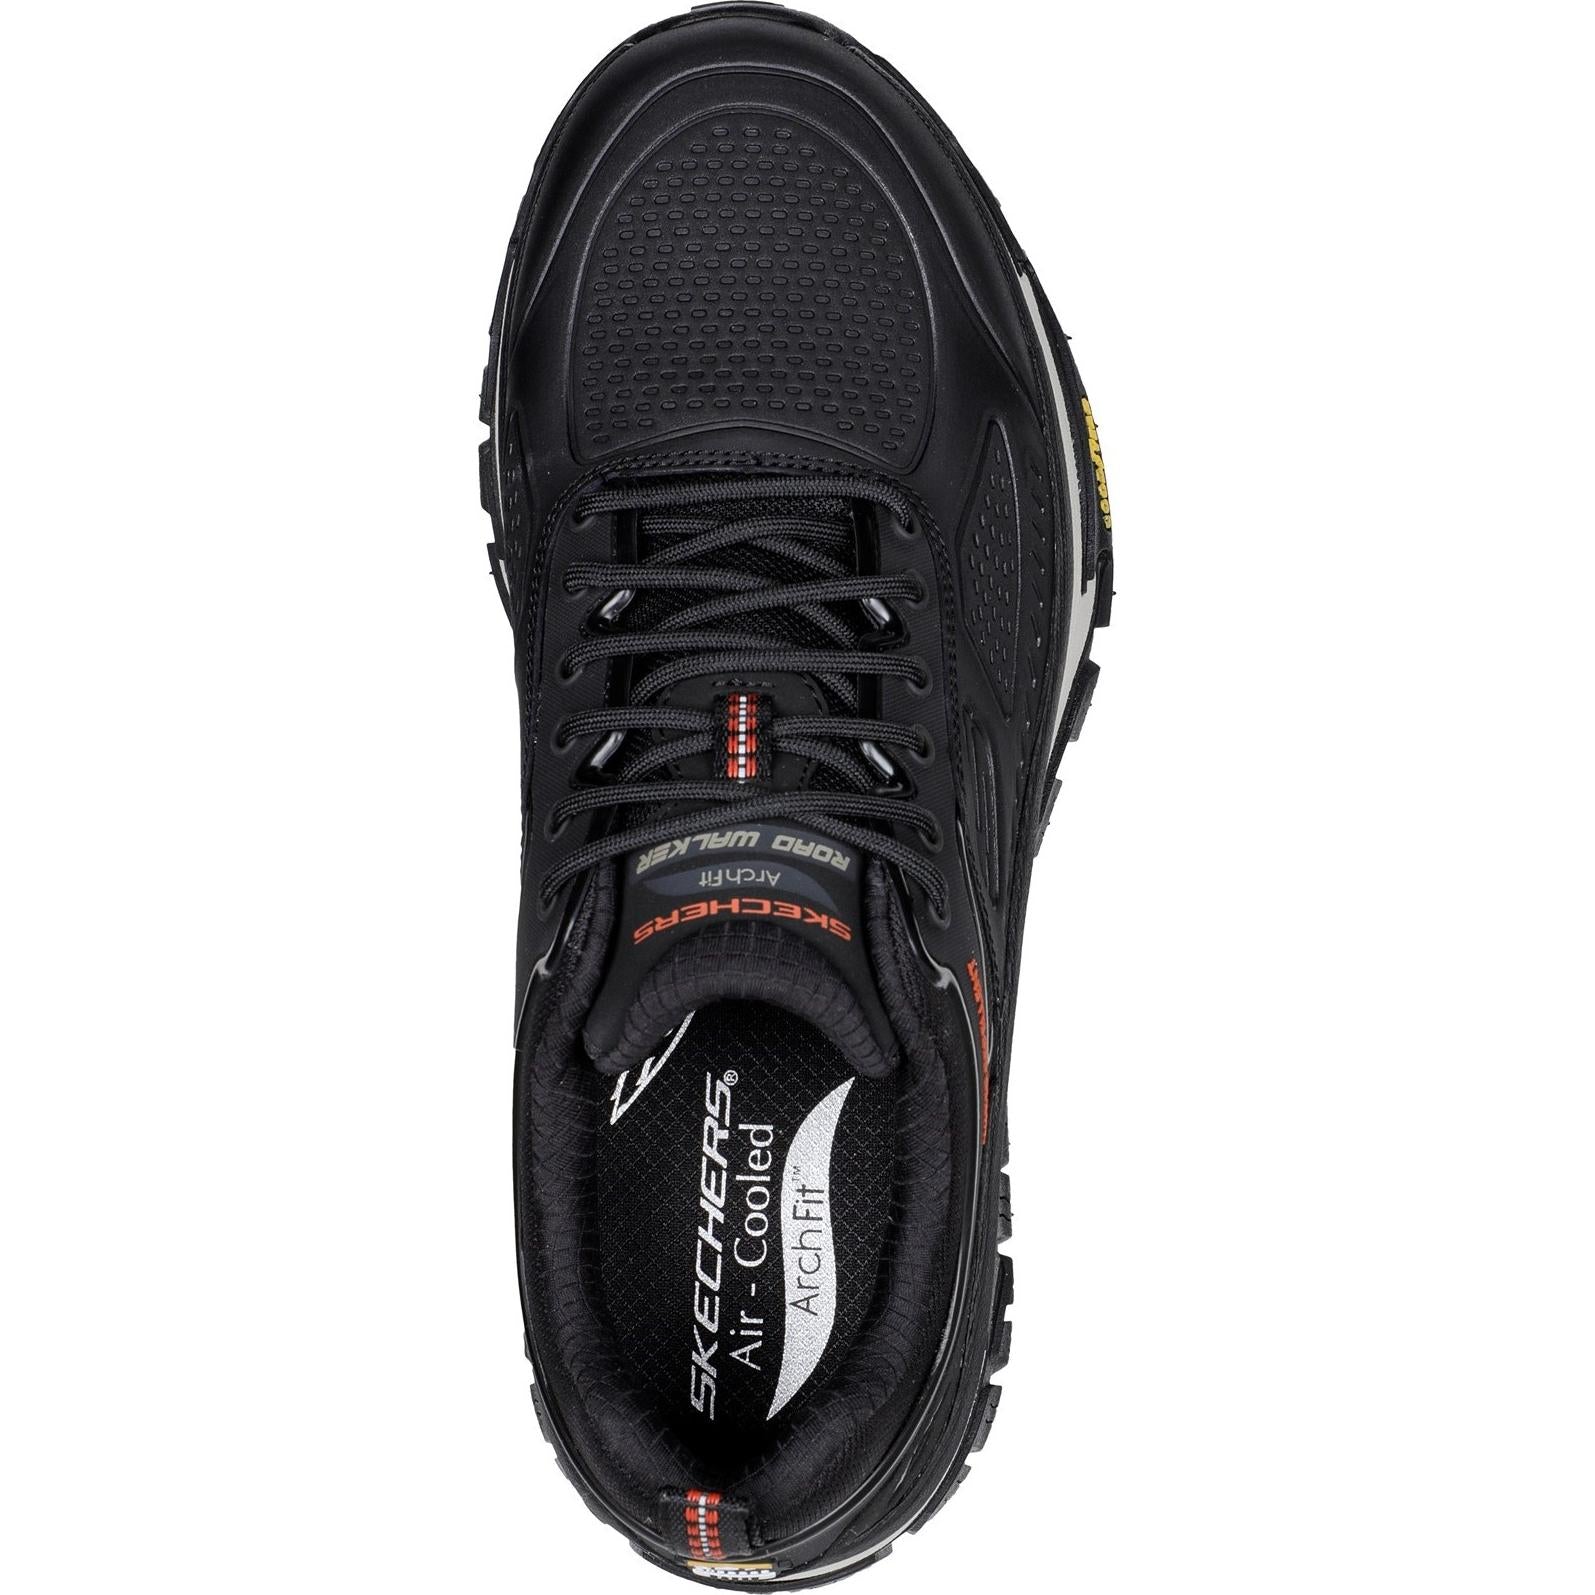 Skechers Relaxed Fit: Arch Fit Road Walker - Recon Boot